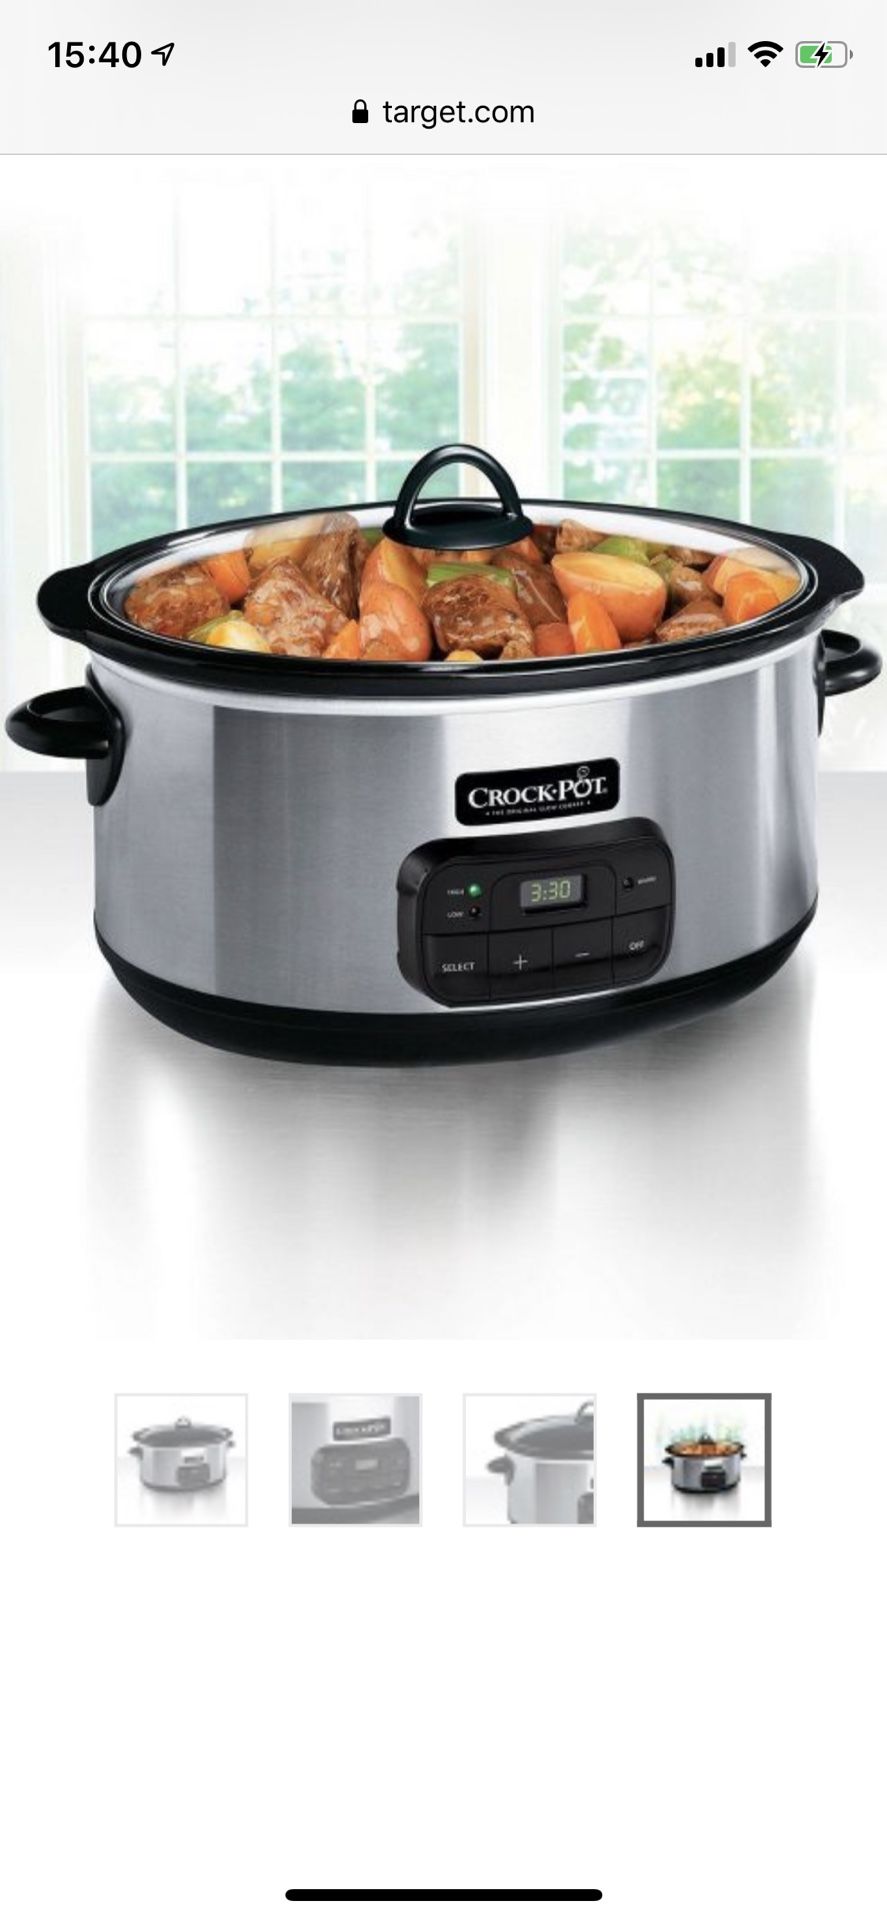 Crock pot - the original slow cooker. In a very good condition. Used just ones.